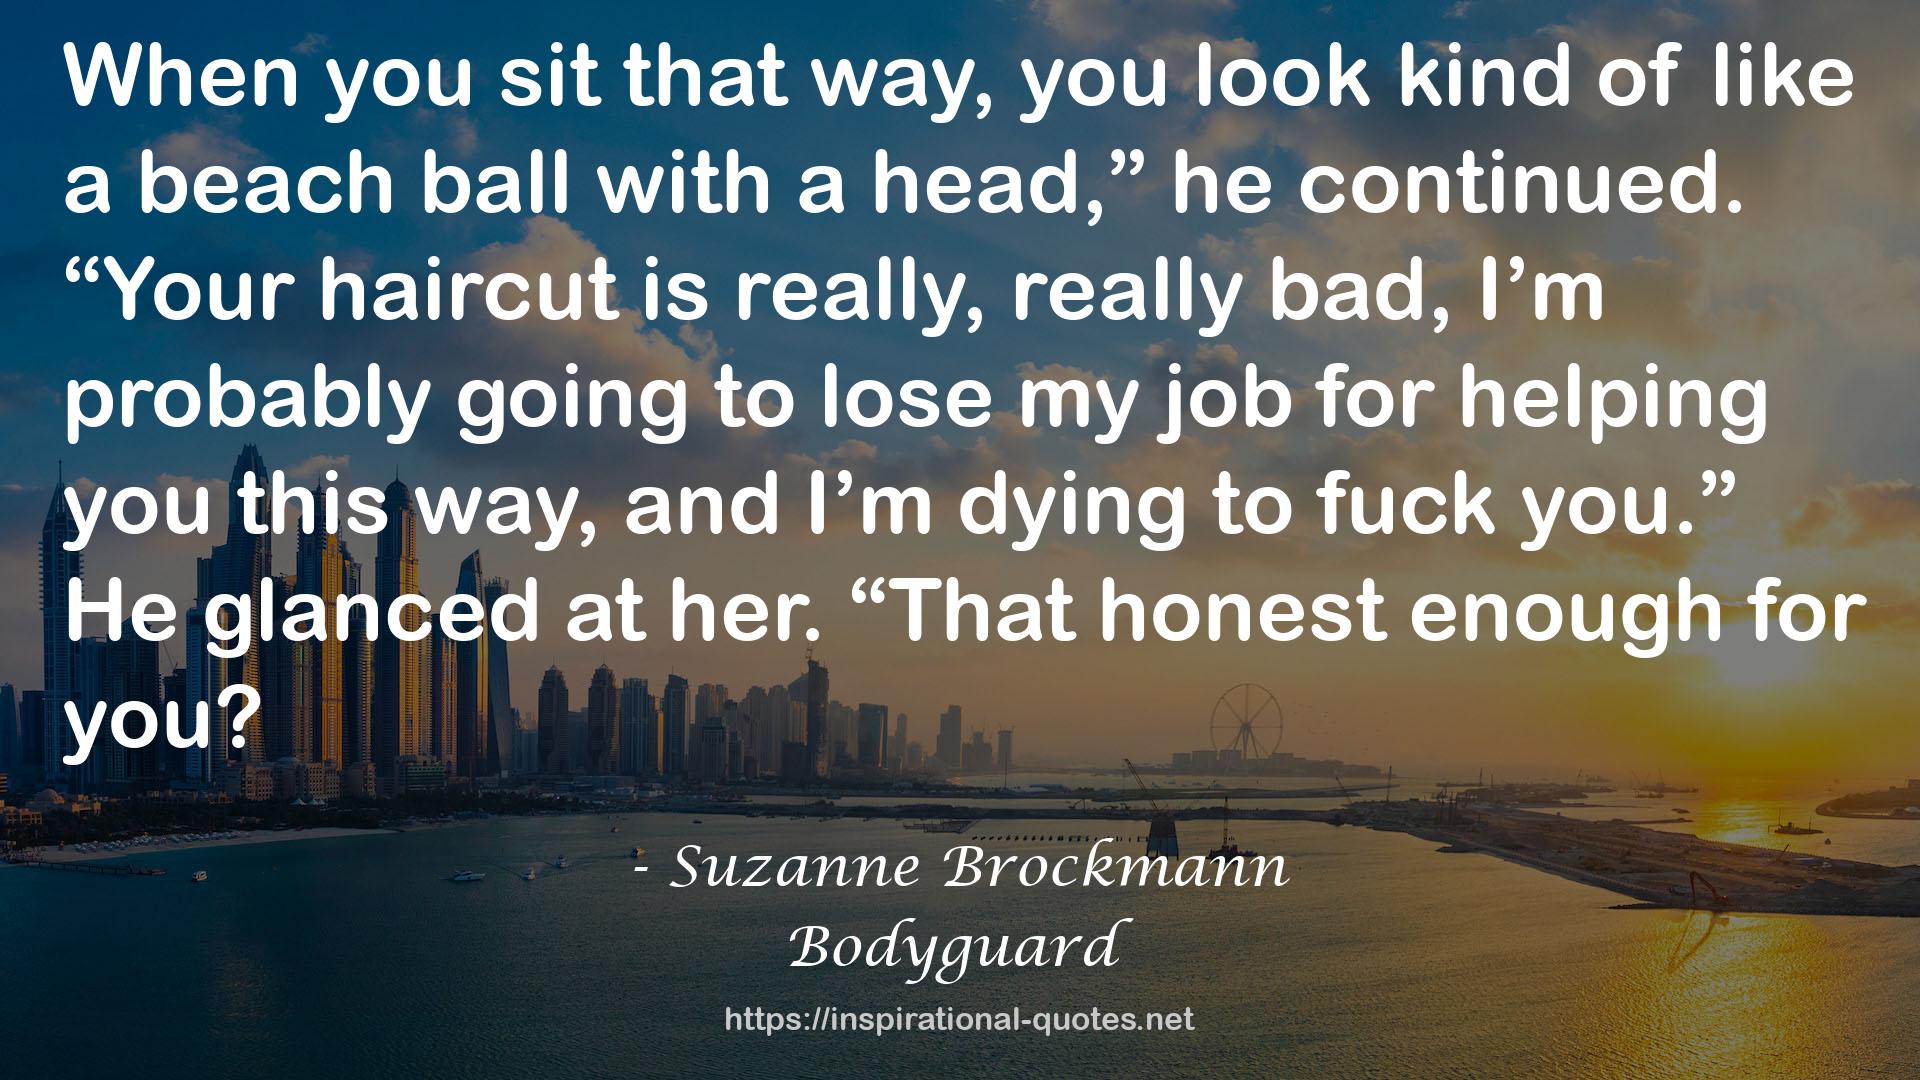 Bodyguard QUOTES